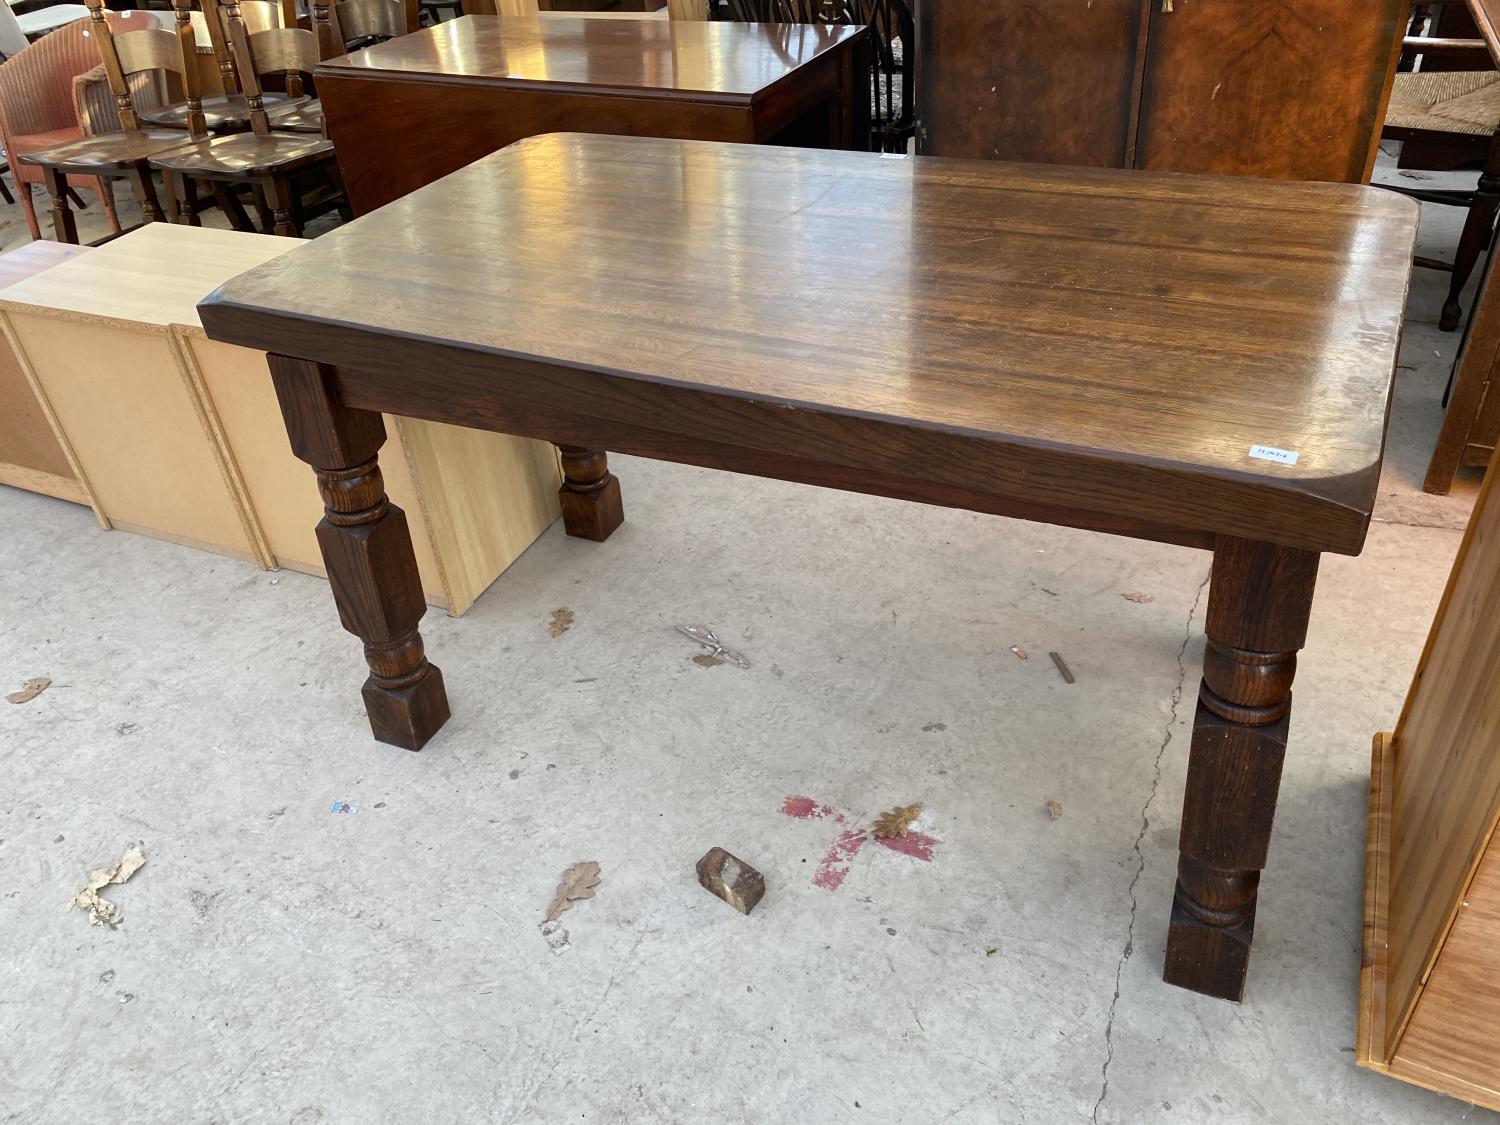 AN OAK REFECTORY STYLE DINING TABLE